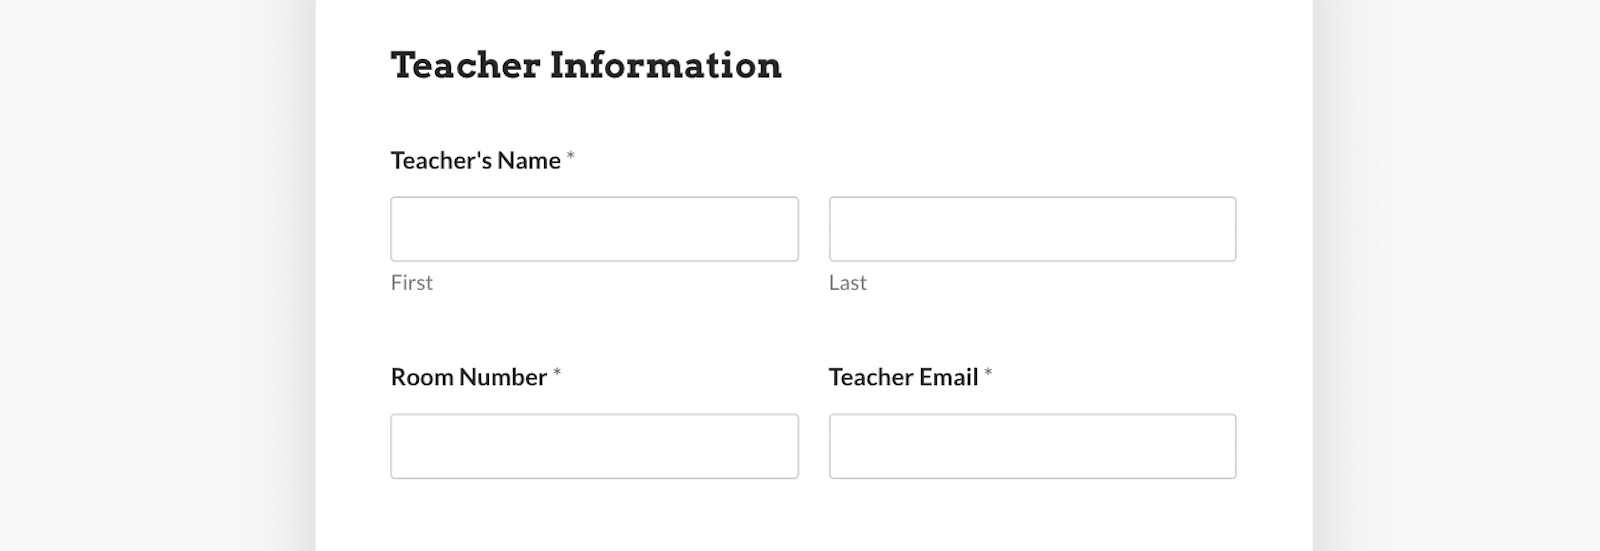 The teacher information section of the form template